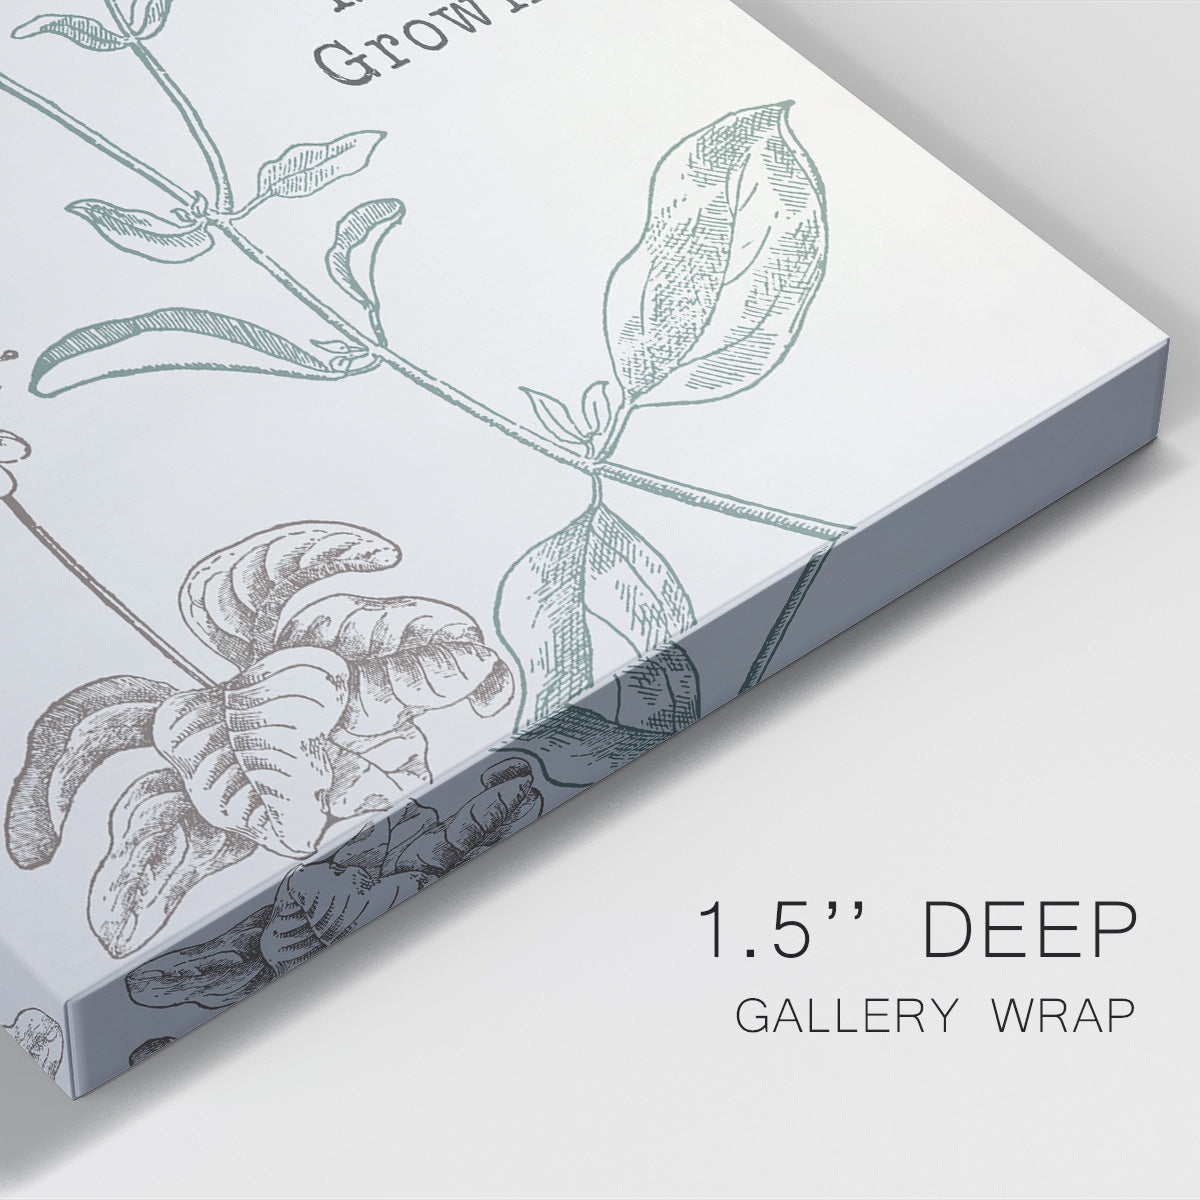 Keep Growing Premium Gallery Wrapped Canvas - Ready to Hang